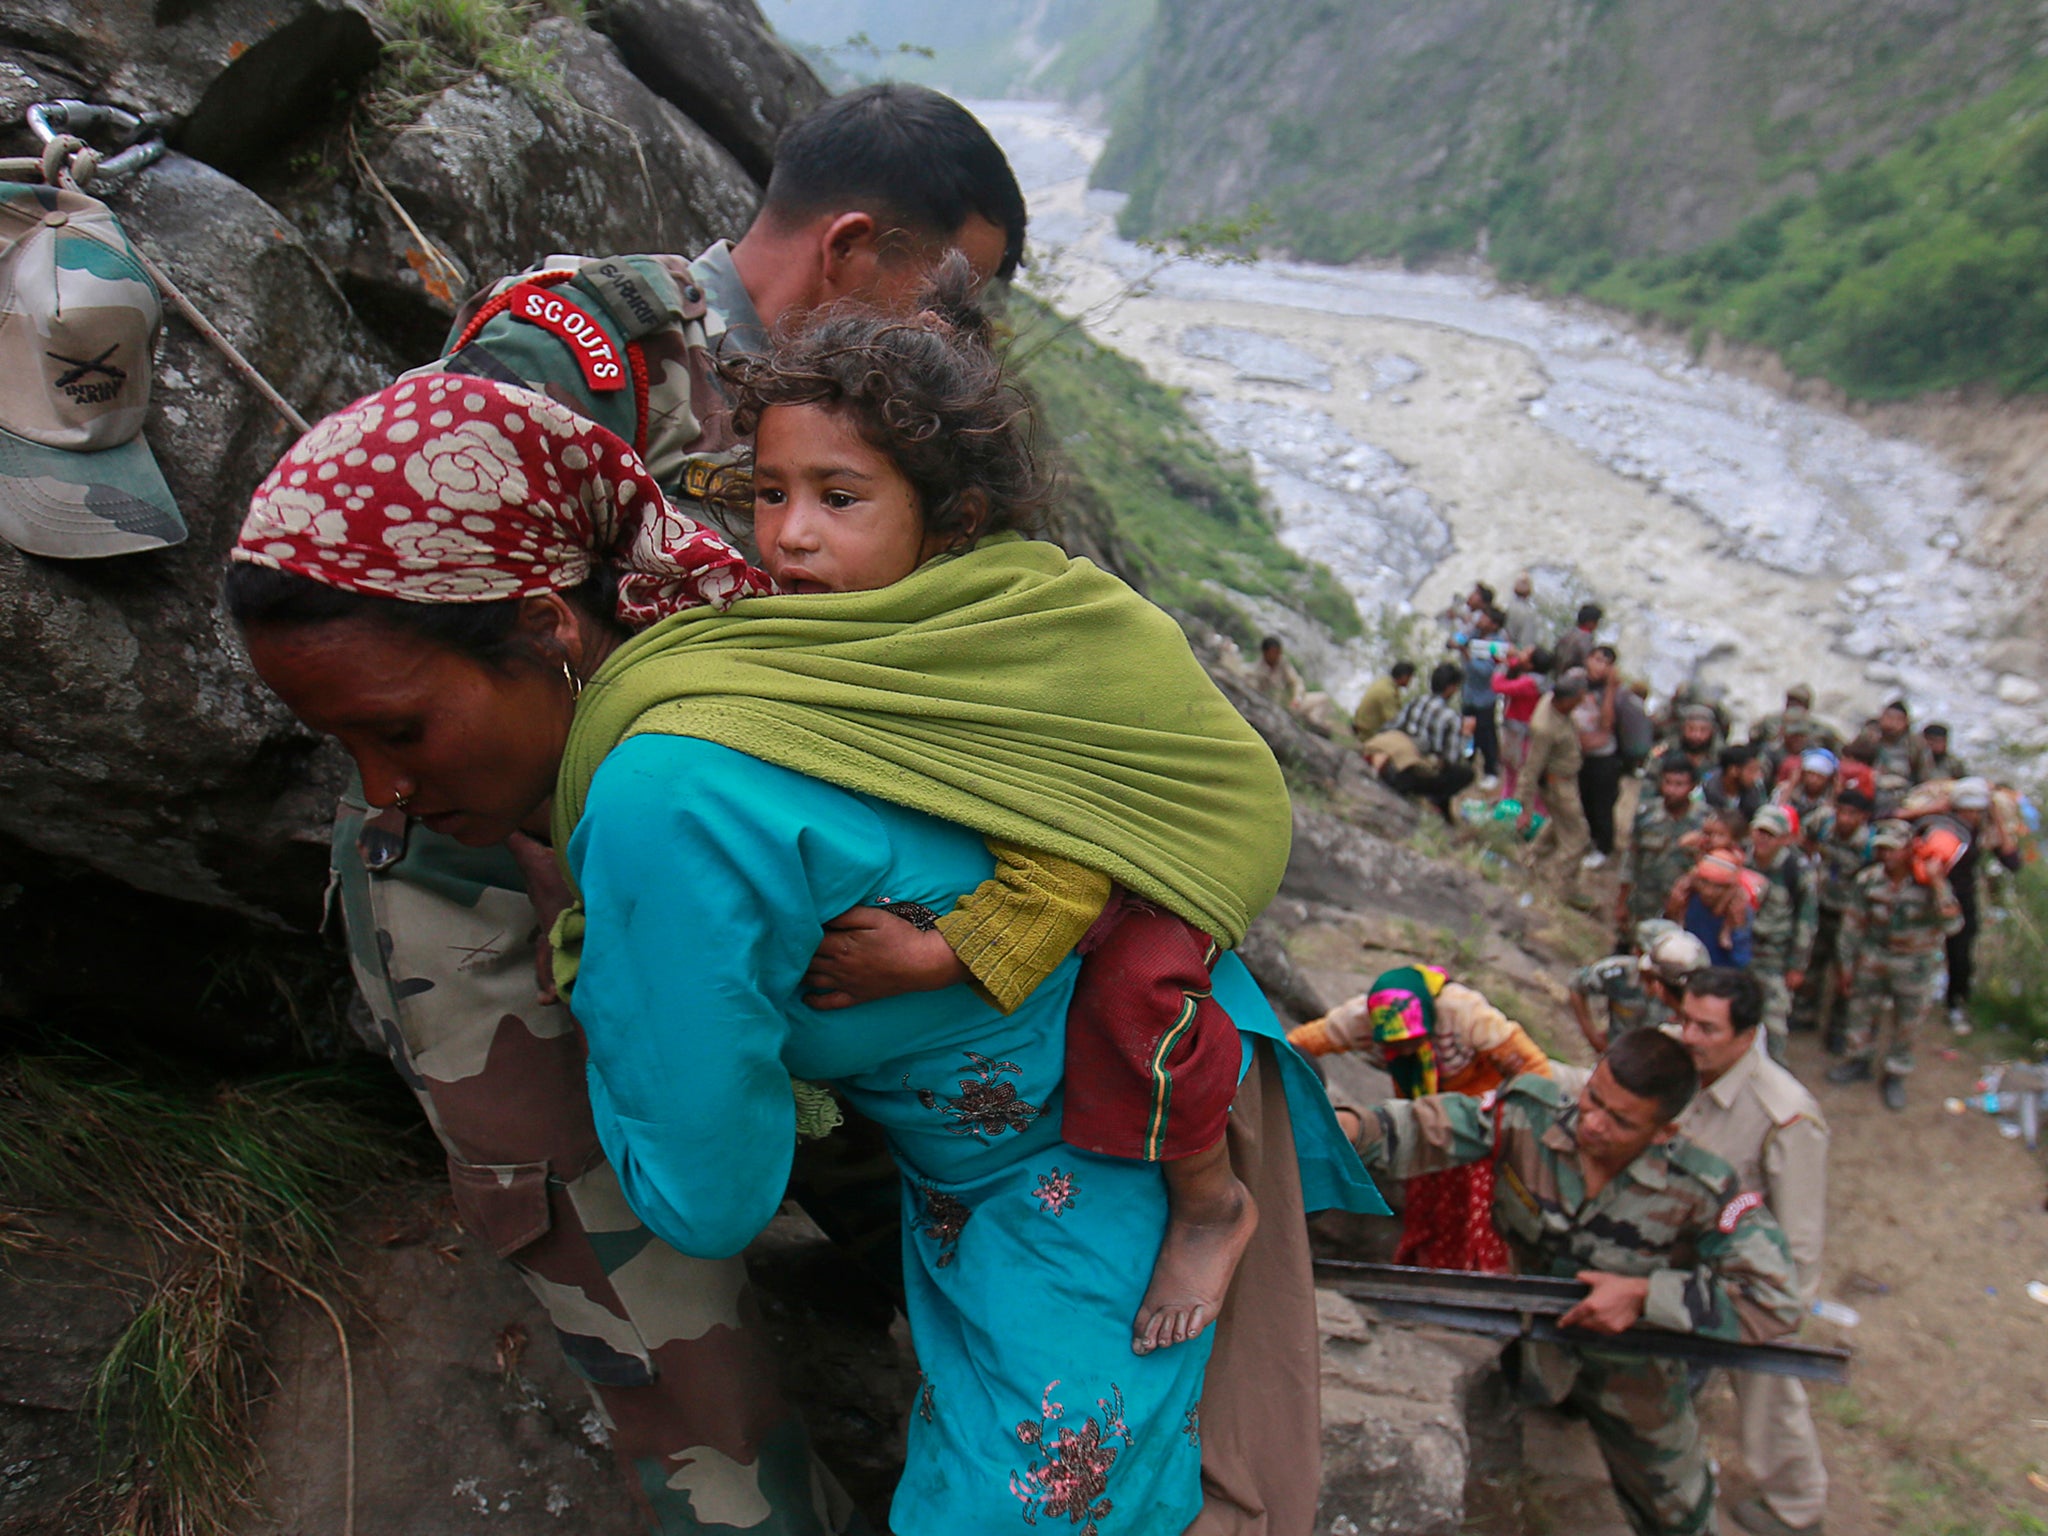 Soldiers assist a woman carrying a child on her back during rescue operations in Govindghat in the Himalayan state of Uttarakhand during the 2013 floods